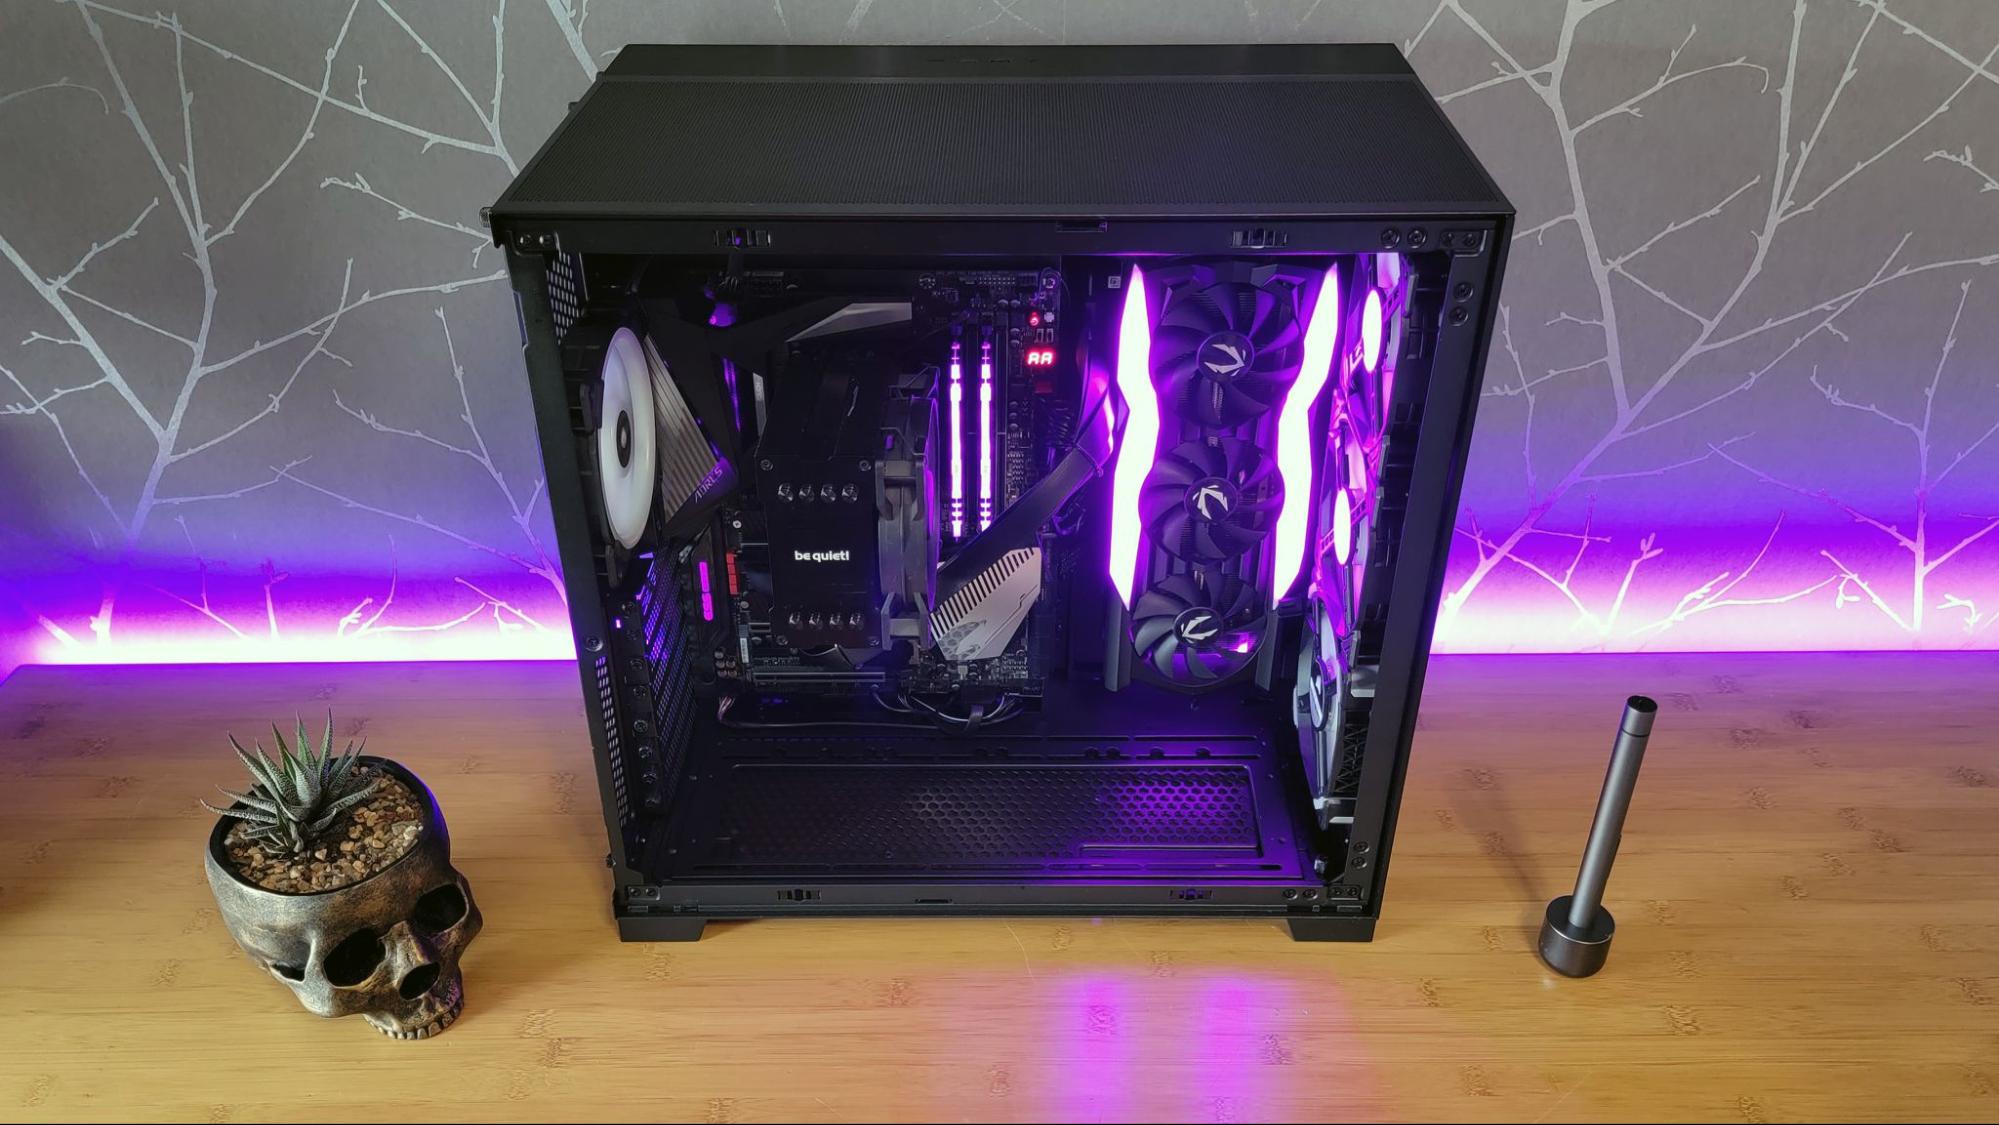 tvetydigheden rustfri matrix PC Airflow Guide: How to Set Up and Position Your Fans | Tom's Hardware